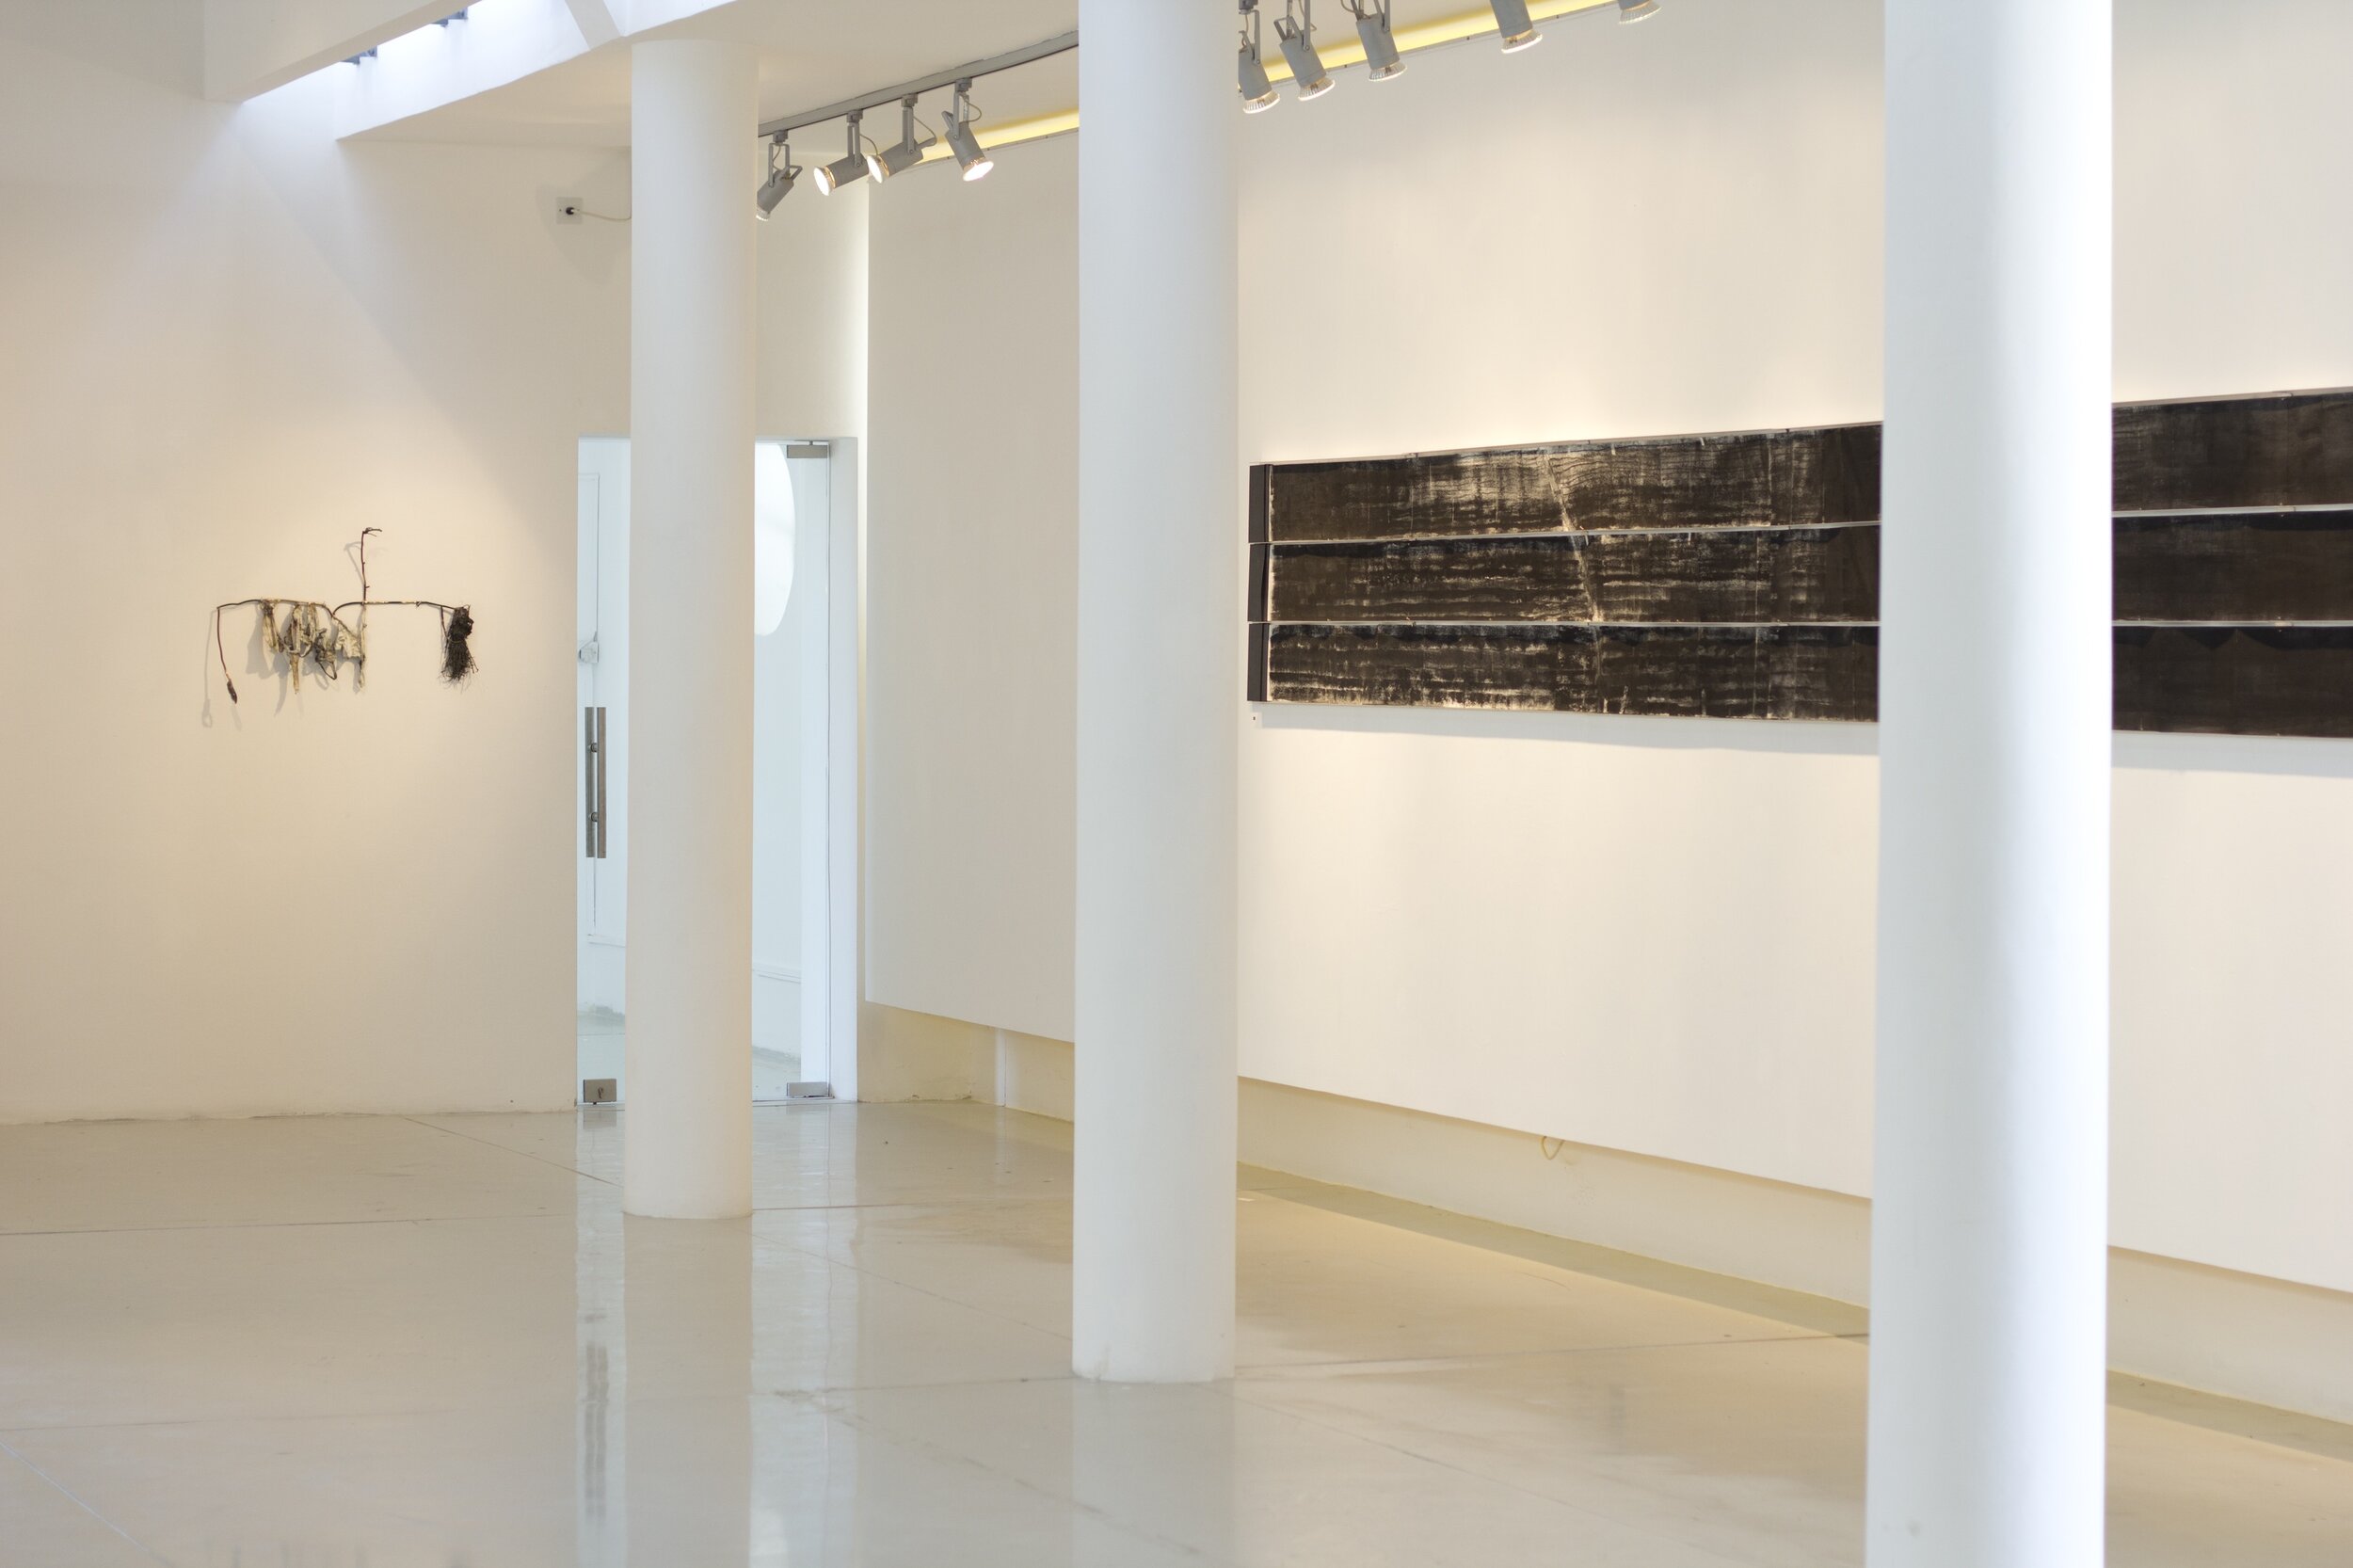  Installation photograph of the group exhibition  Travellers from Australia,  Pailia Ilektriki, Ktima Pafos, Cyprus, 2-15 October 2017. Works by artists  Penny Harris  (left) and  Lawrence Wallen  (right) visible in the gallery. Photo: Shelley Webste